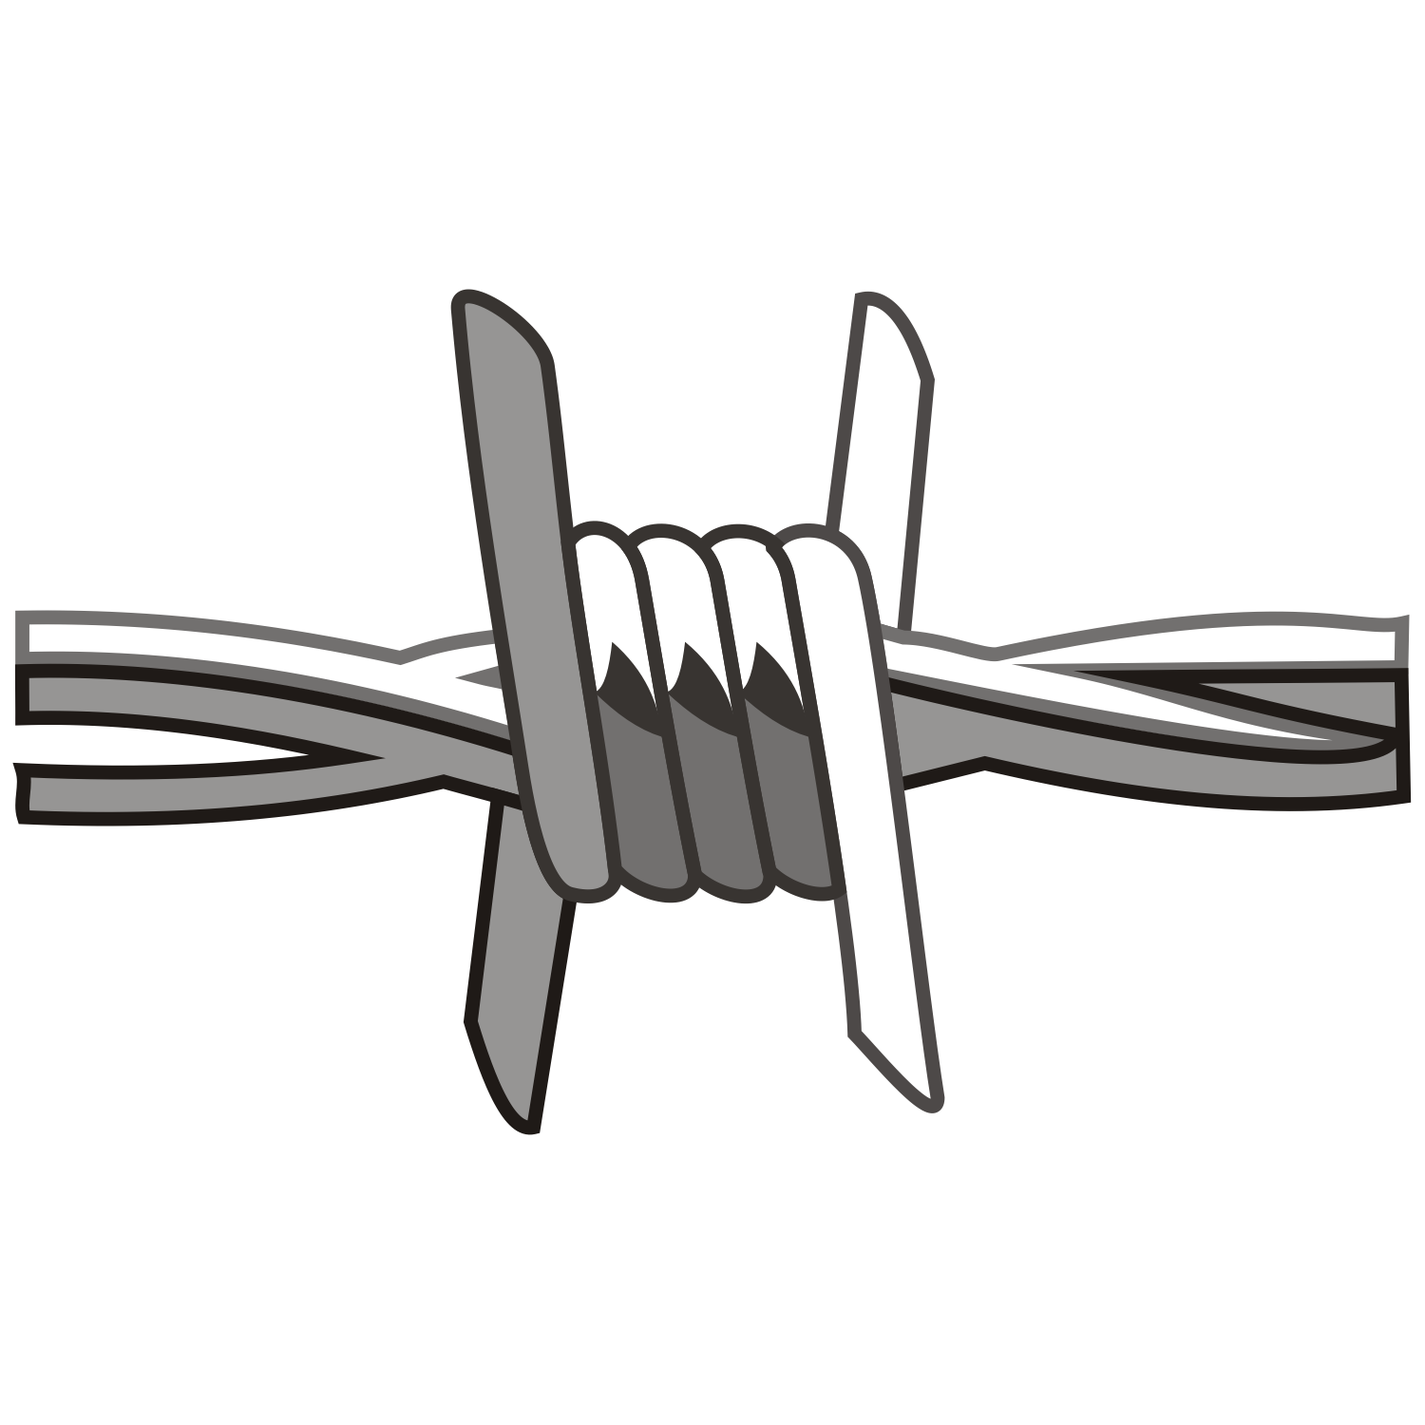 Free Barb Wire Vector Clipart - Free to use Clip Art Resource